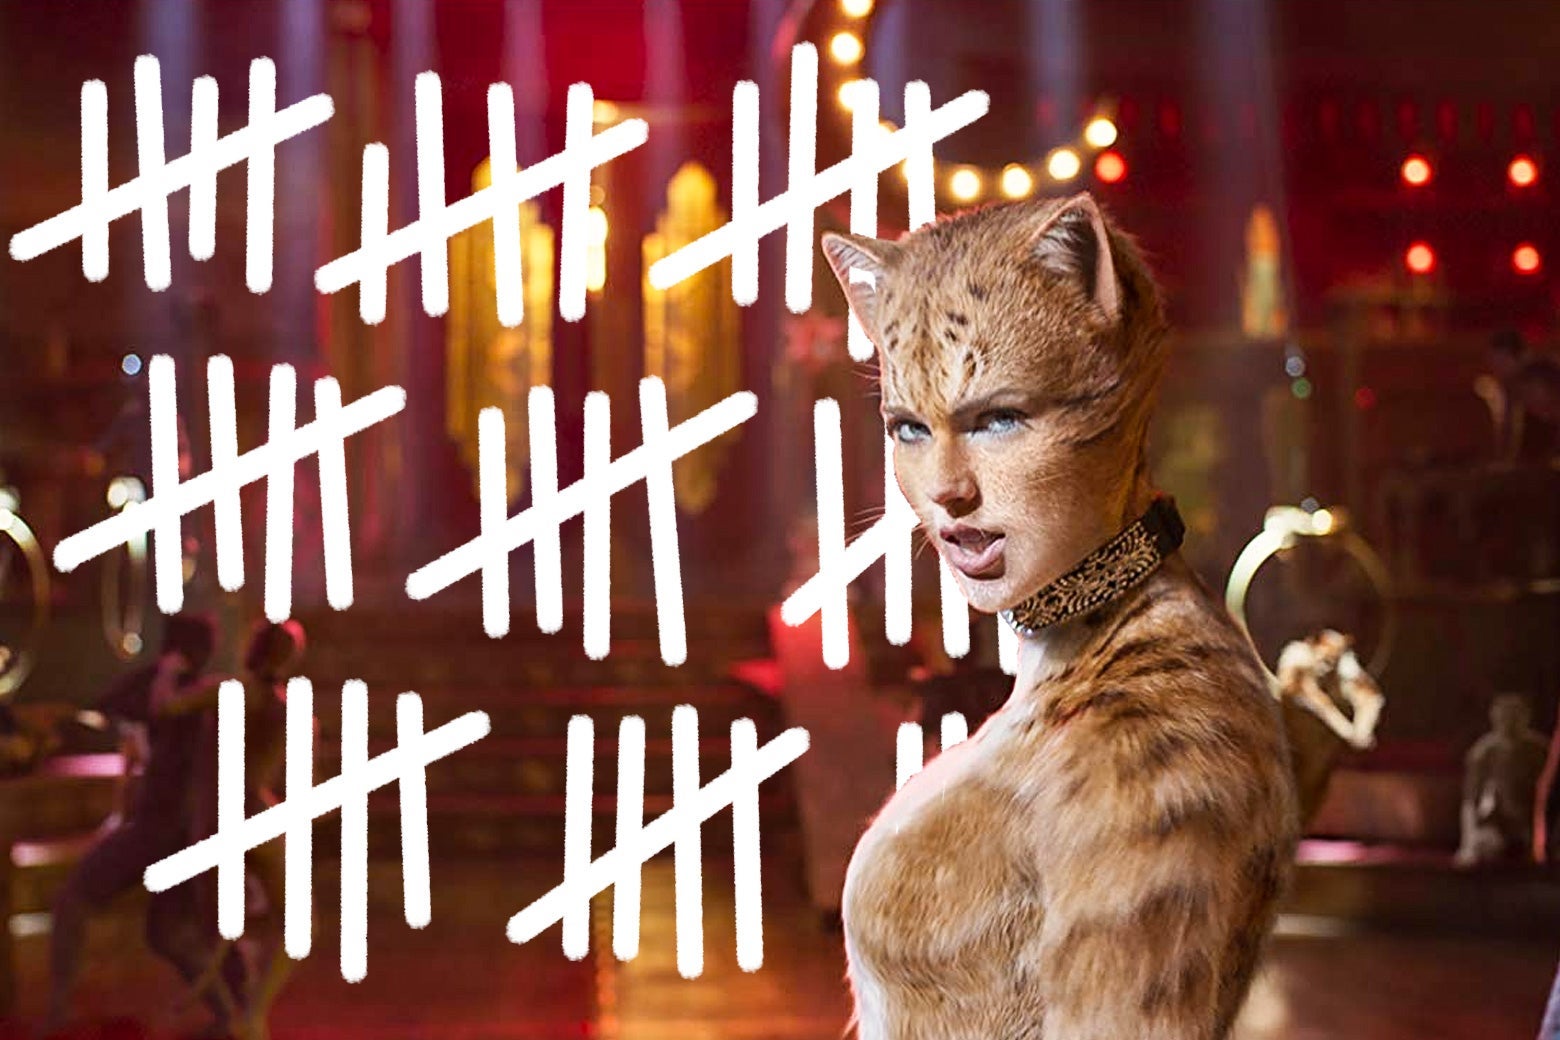 Taylor Swift as Bombalurina with fur, pointed ears, and a collar. Several dozen white tally marks fill the frame.